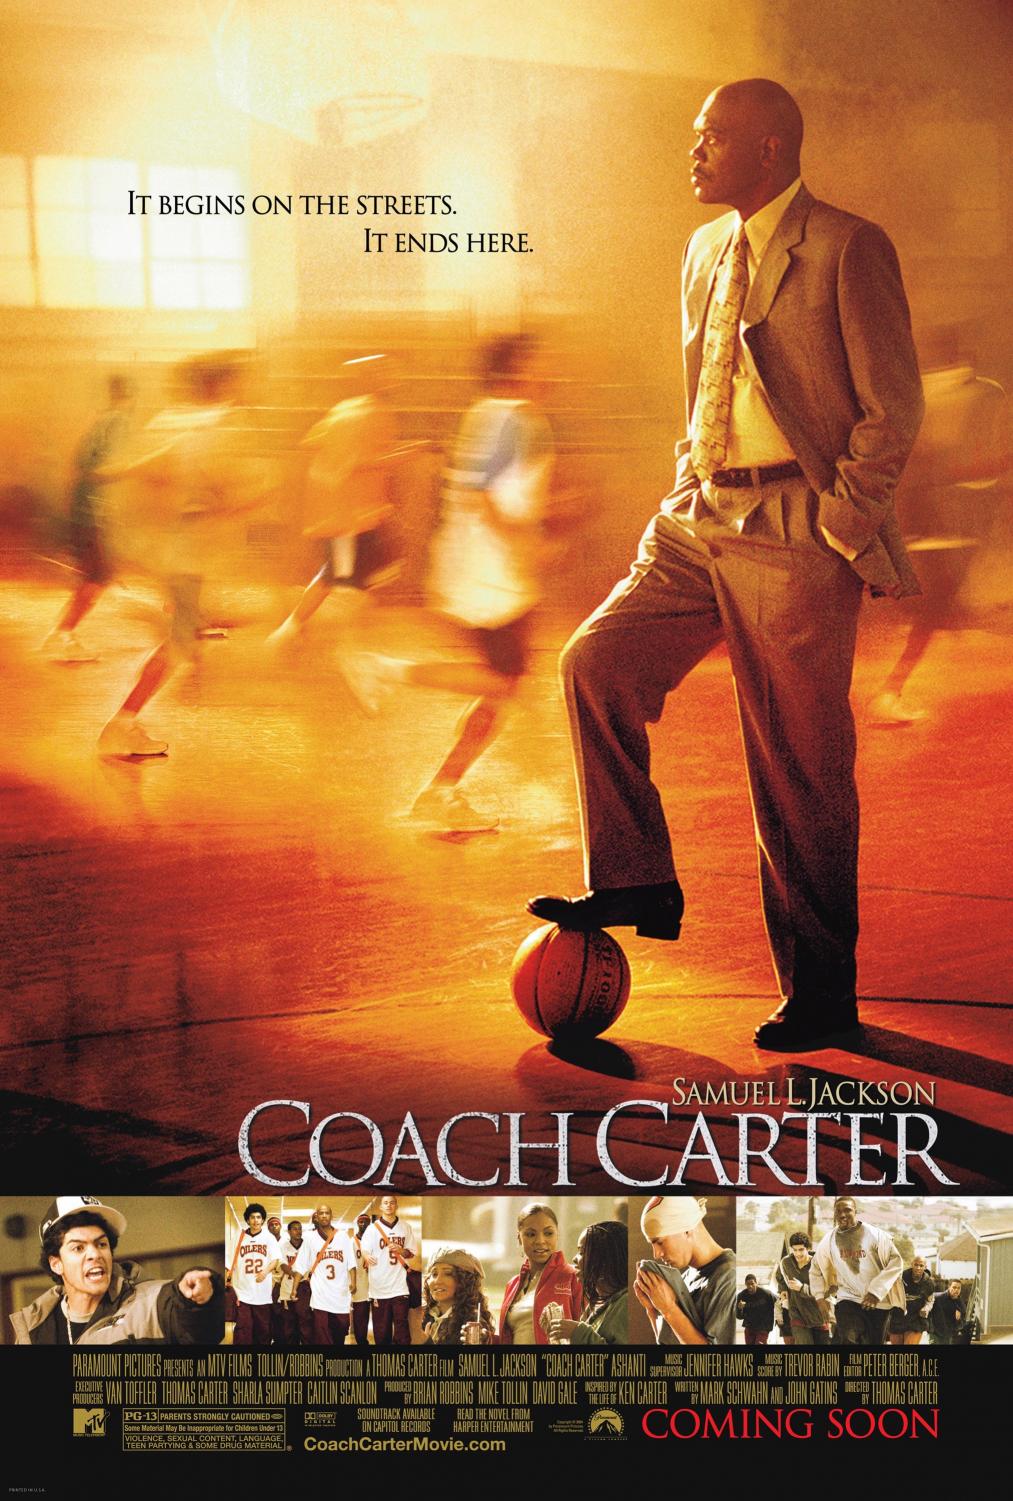 The 'real' Coach Carter inspires PD students